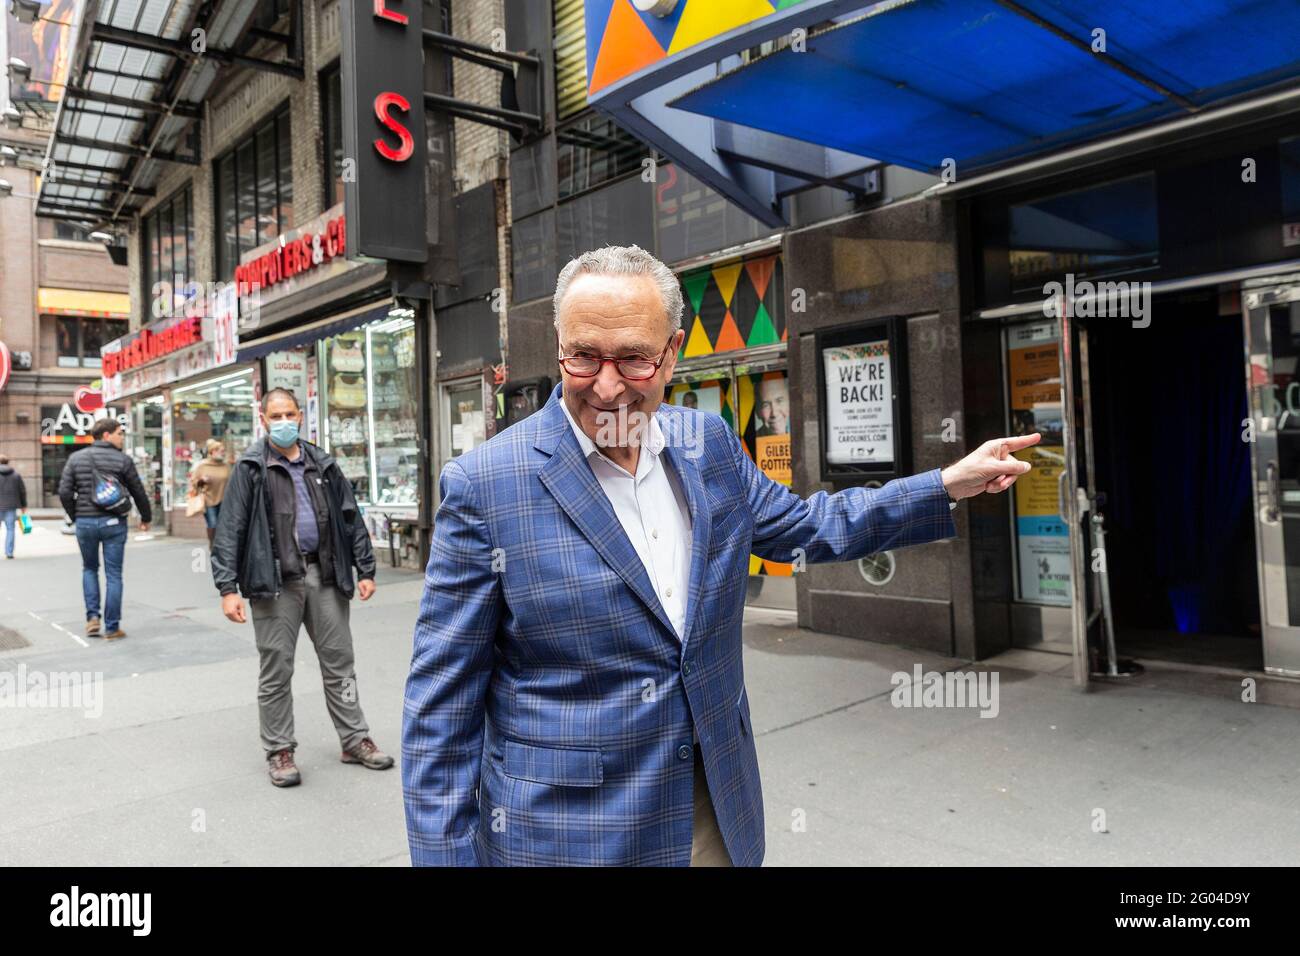 New York, United States. 31st May, 2021. U. S. Senator Charles Schumer arrives for Carolines on Broadway comedy club re-opening after pandemic ceremony. Senator Charles Schumer lauded Safe our Stages (SOS) bill passed by Senate to help cultural venues to survive pandemic. He also cracked few jokes saying it is comedy club he does not have a choice but say them. (Photo by Lev Radin/Pacific Press) Credit: Pacific Press Media Production Corp./Alamy Live News Stock Photo